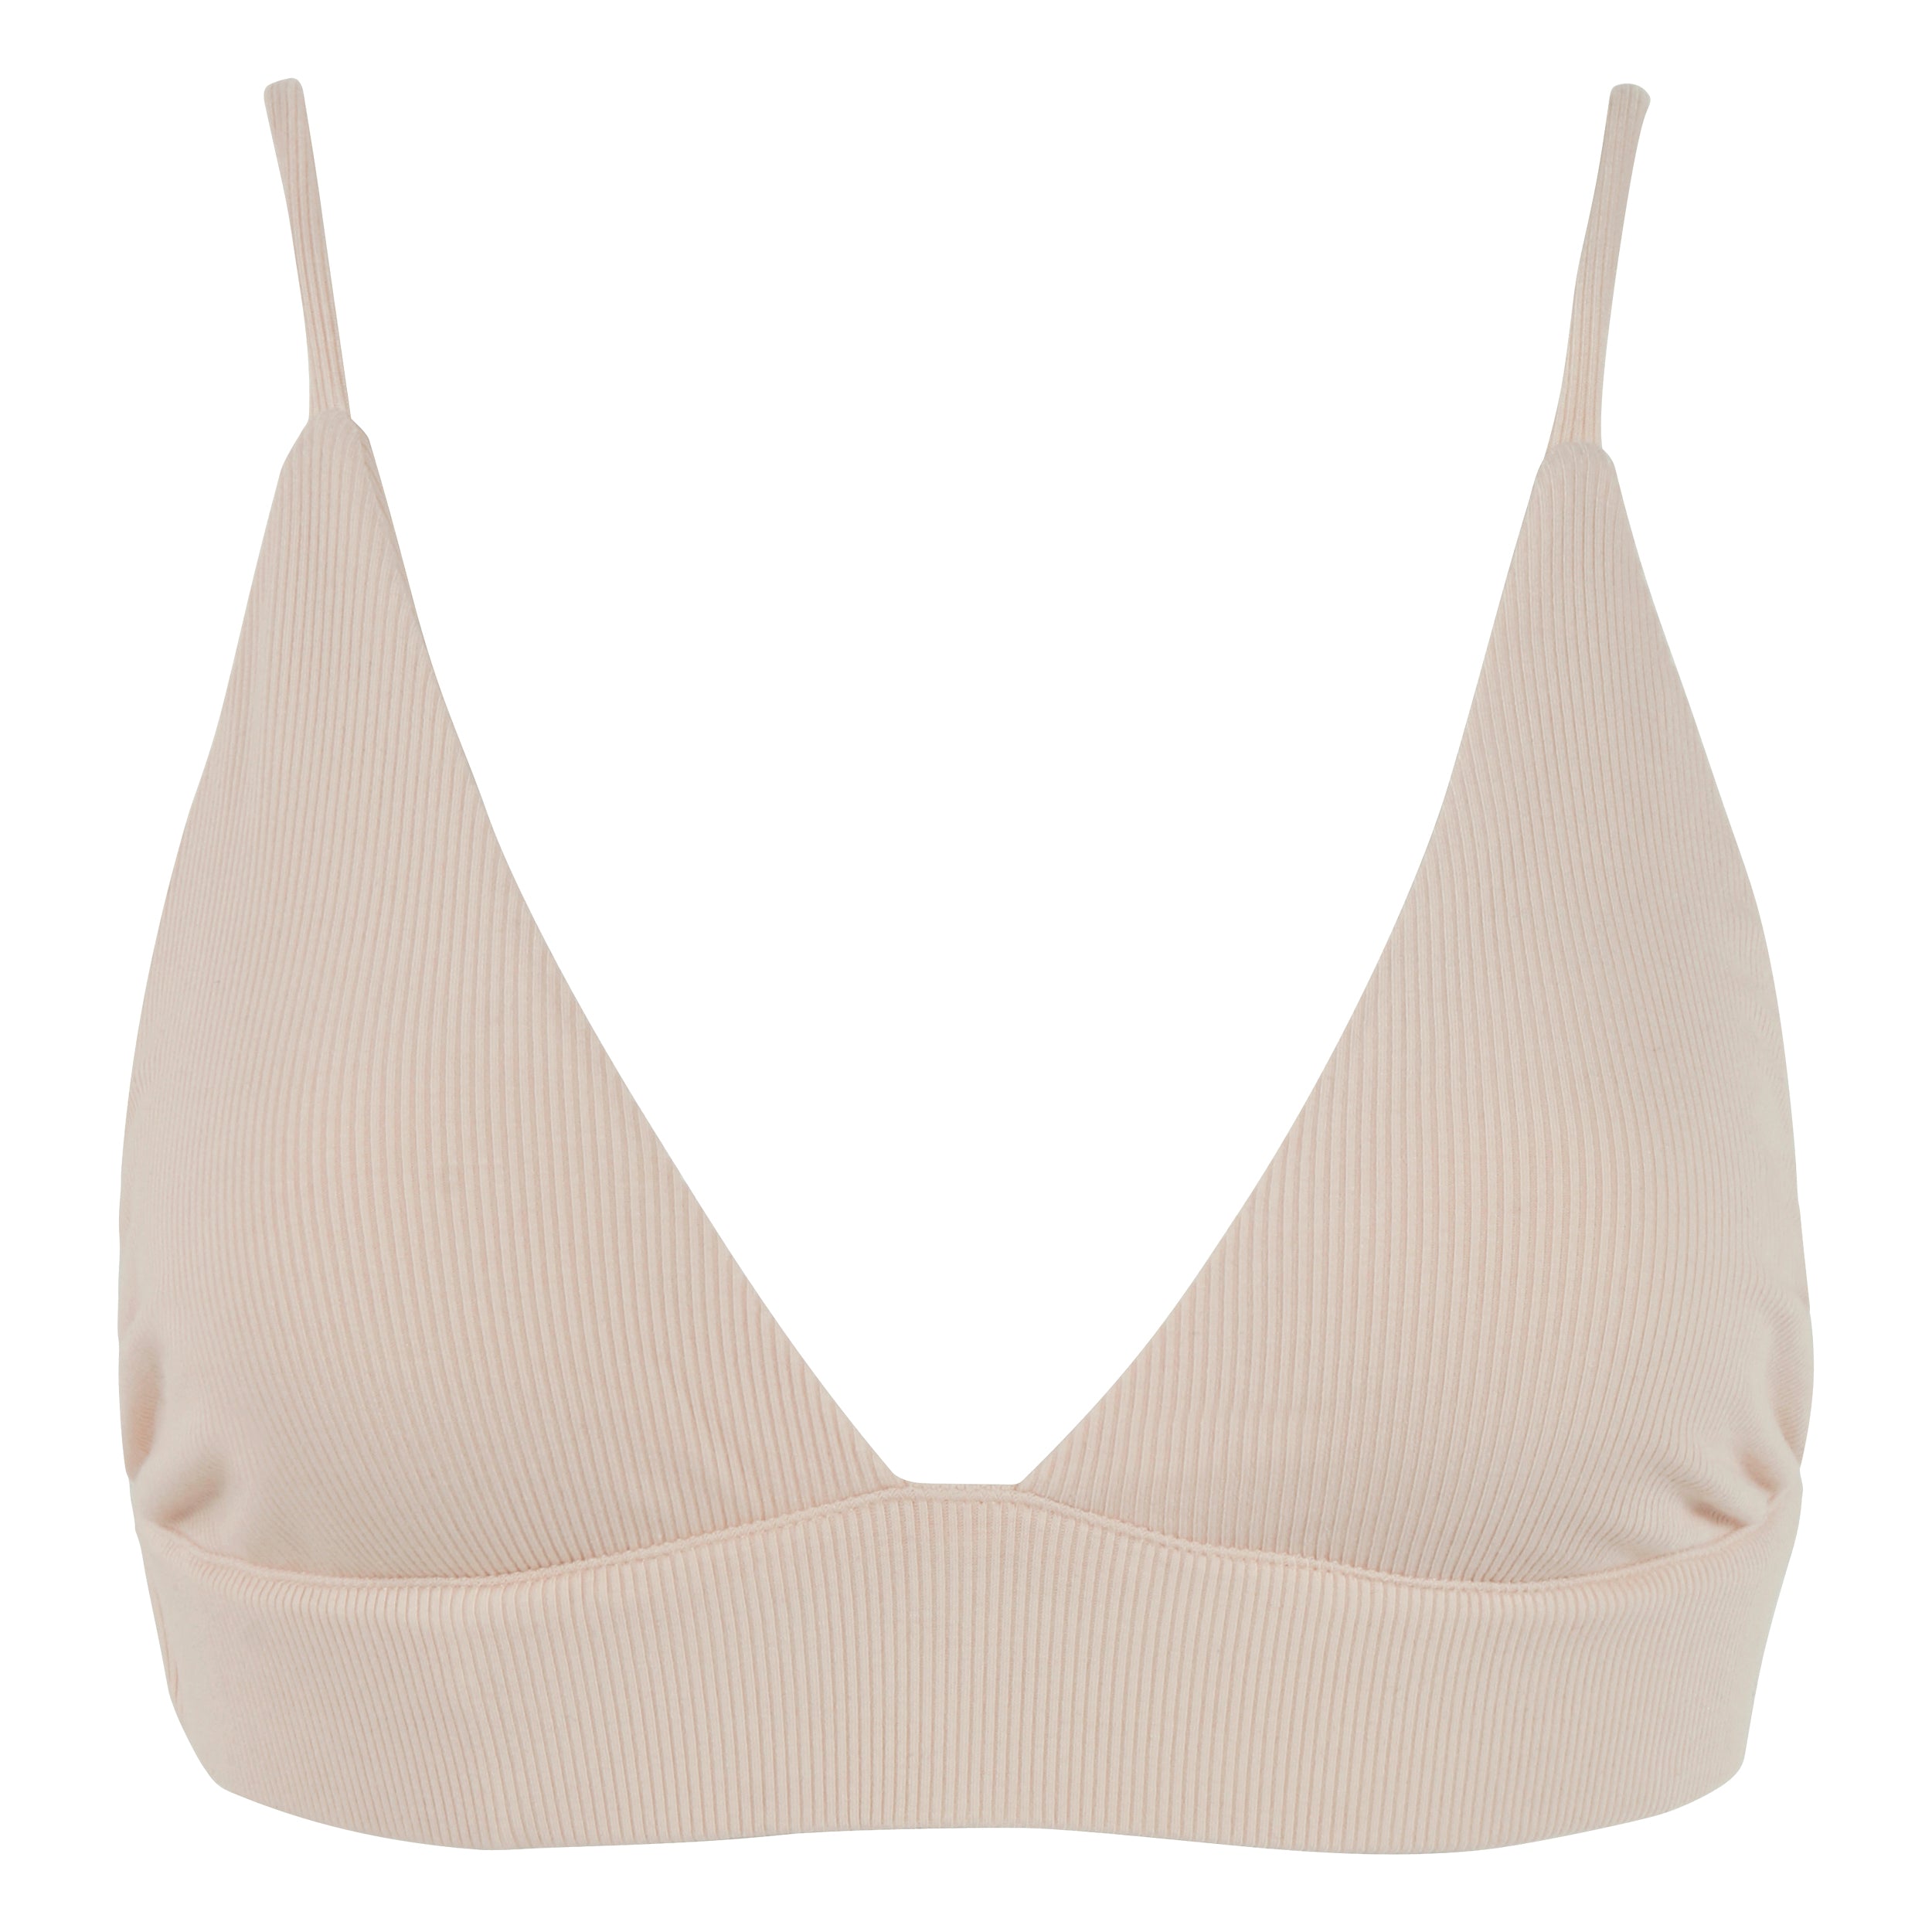 Out From Under Bisou Ribbed Triangle Bralette